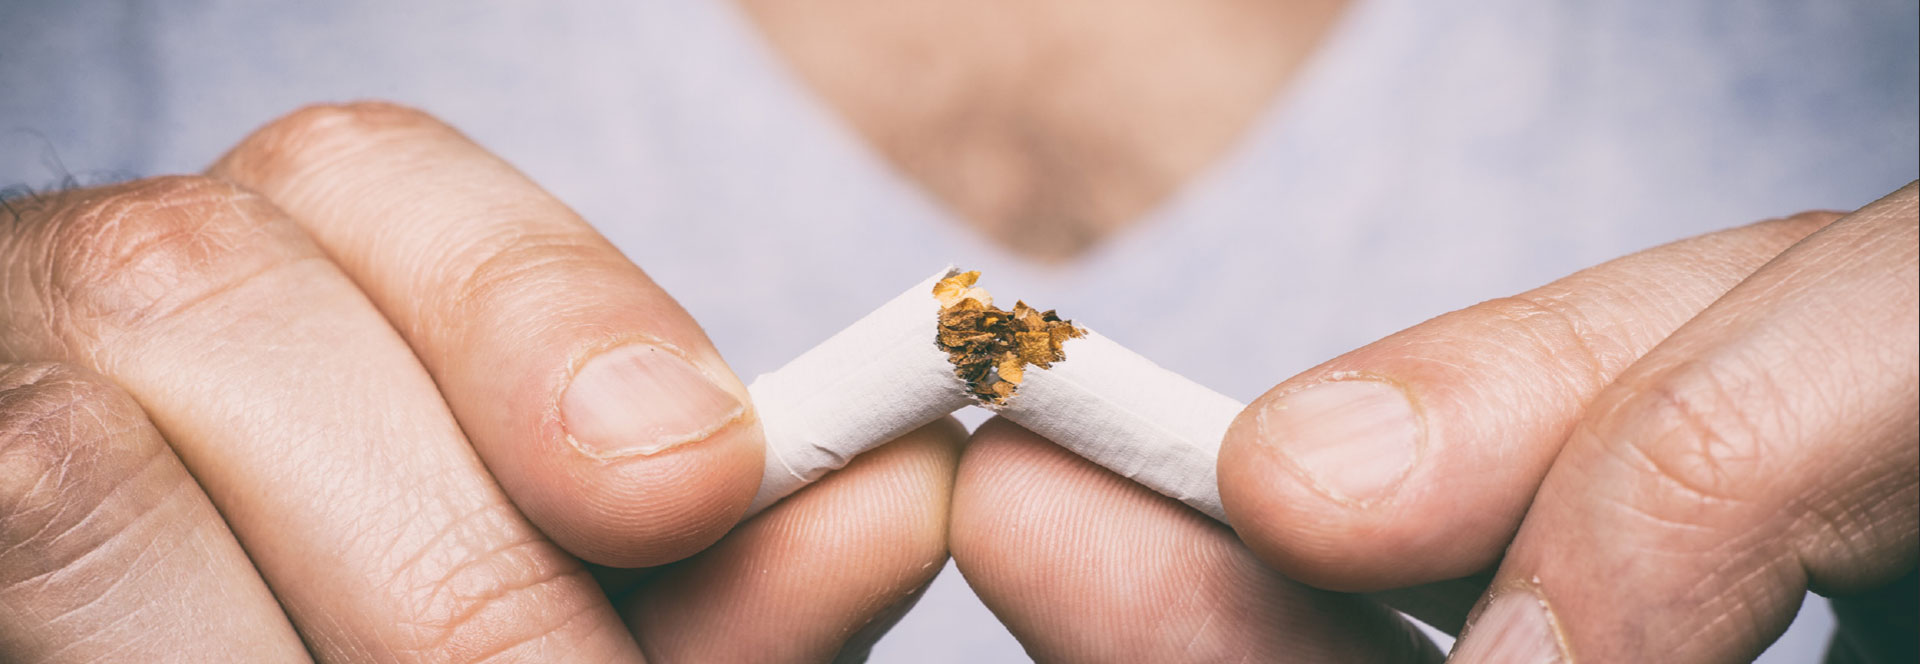 Cigarette packs could soon include advice on how to quit smoking